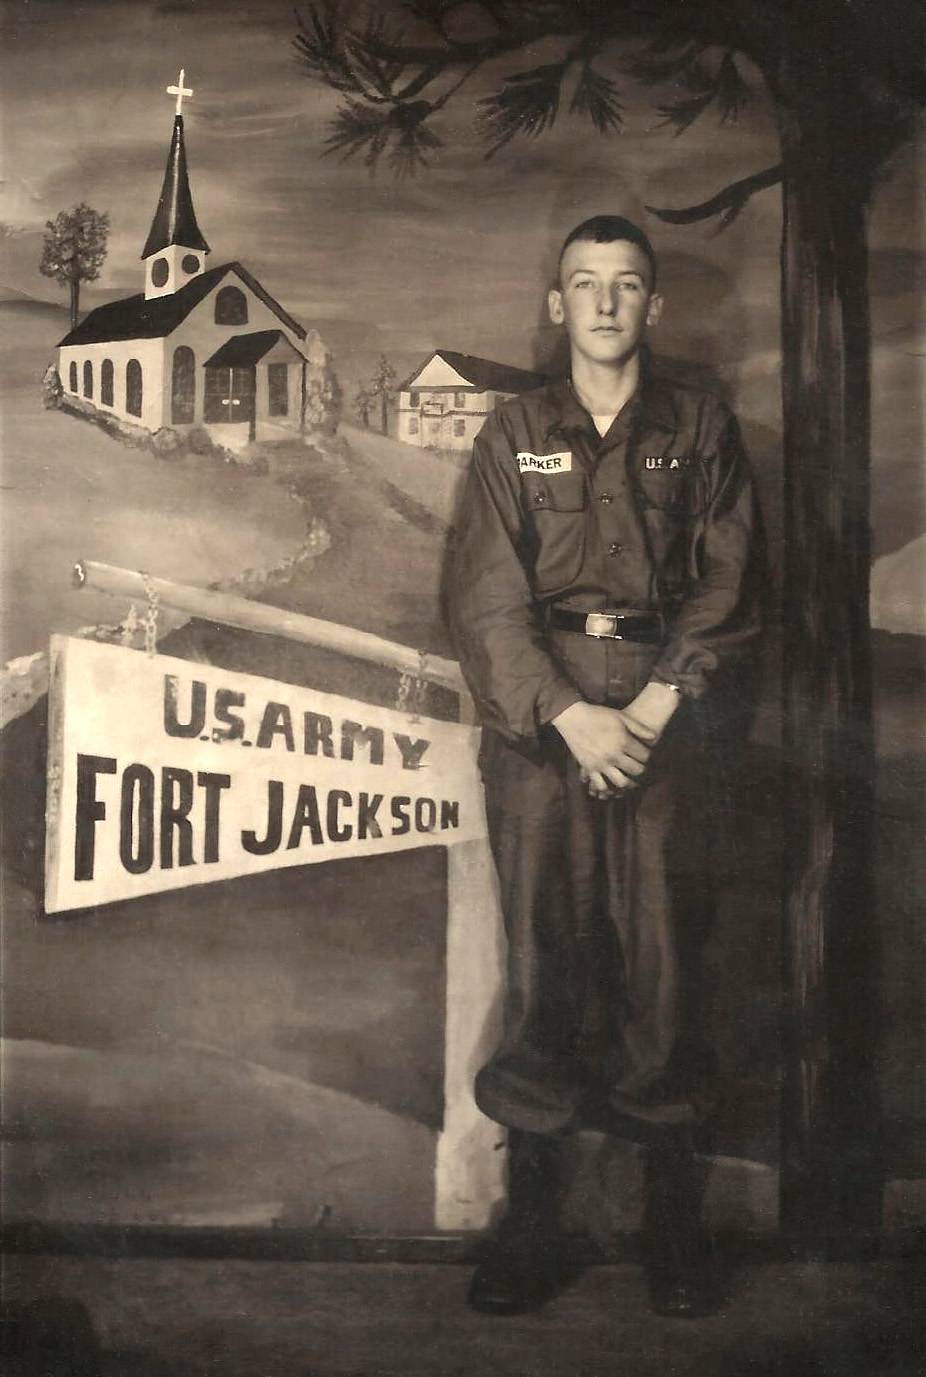 This picture was taken in the early to mid-60s. My Uncle Wayne was in the Army. This was taken as he completed training before he headed for Germany. He was born and raised in Louisiana and Texas. View full size.